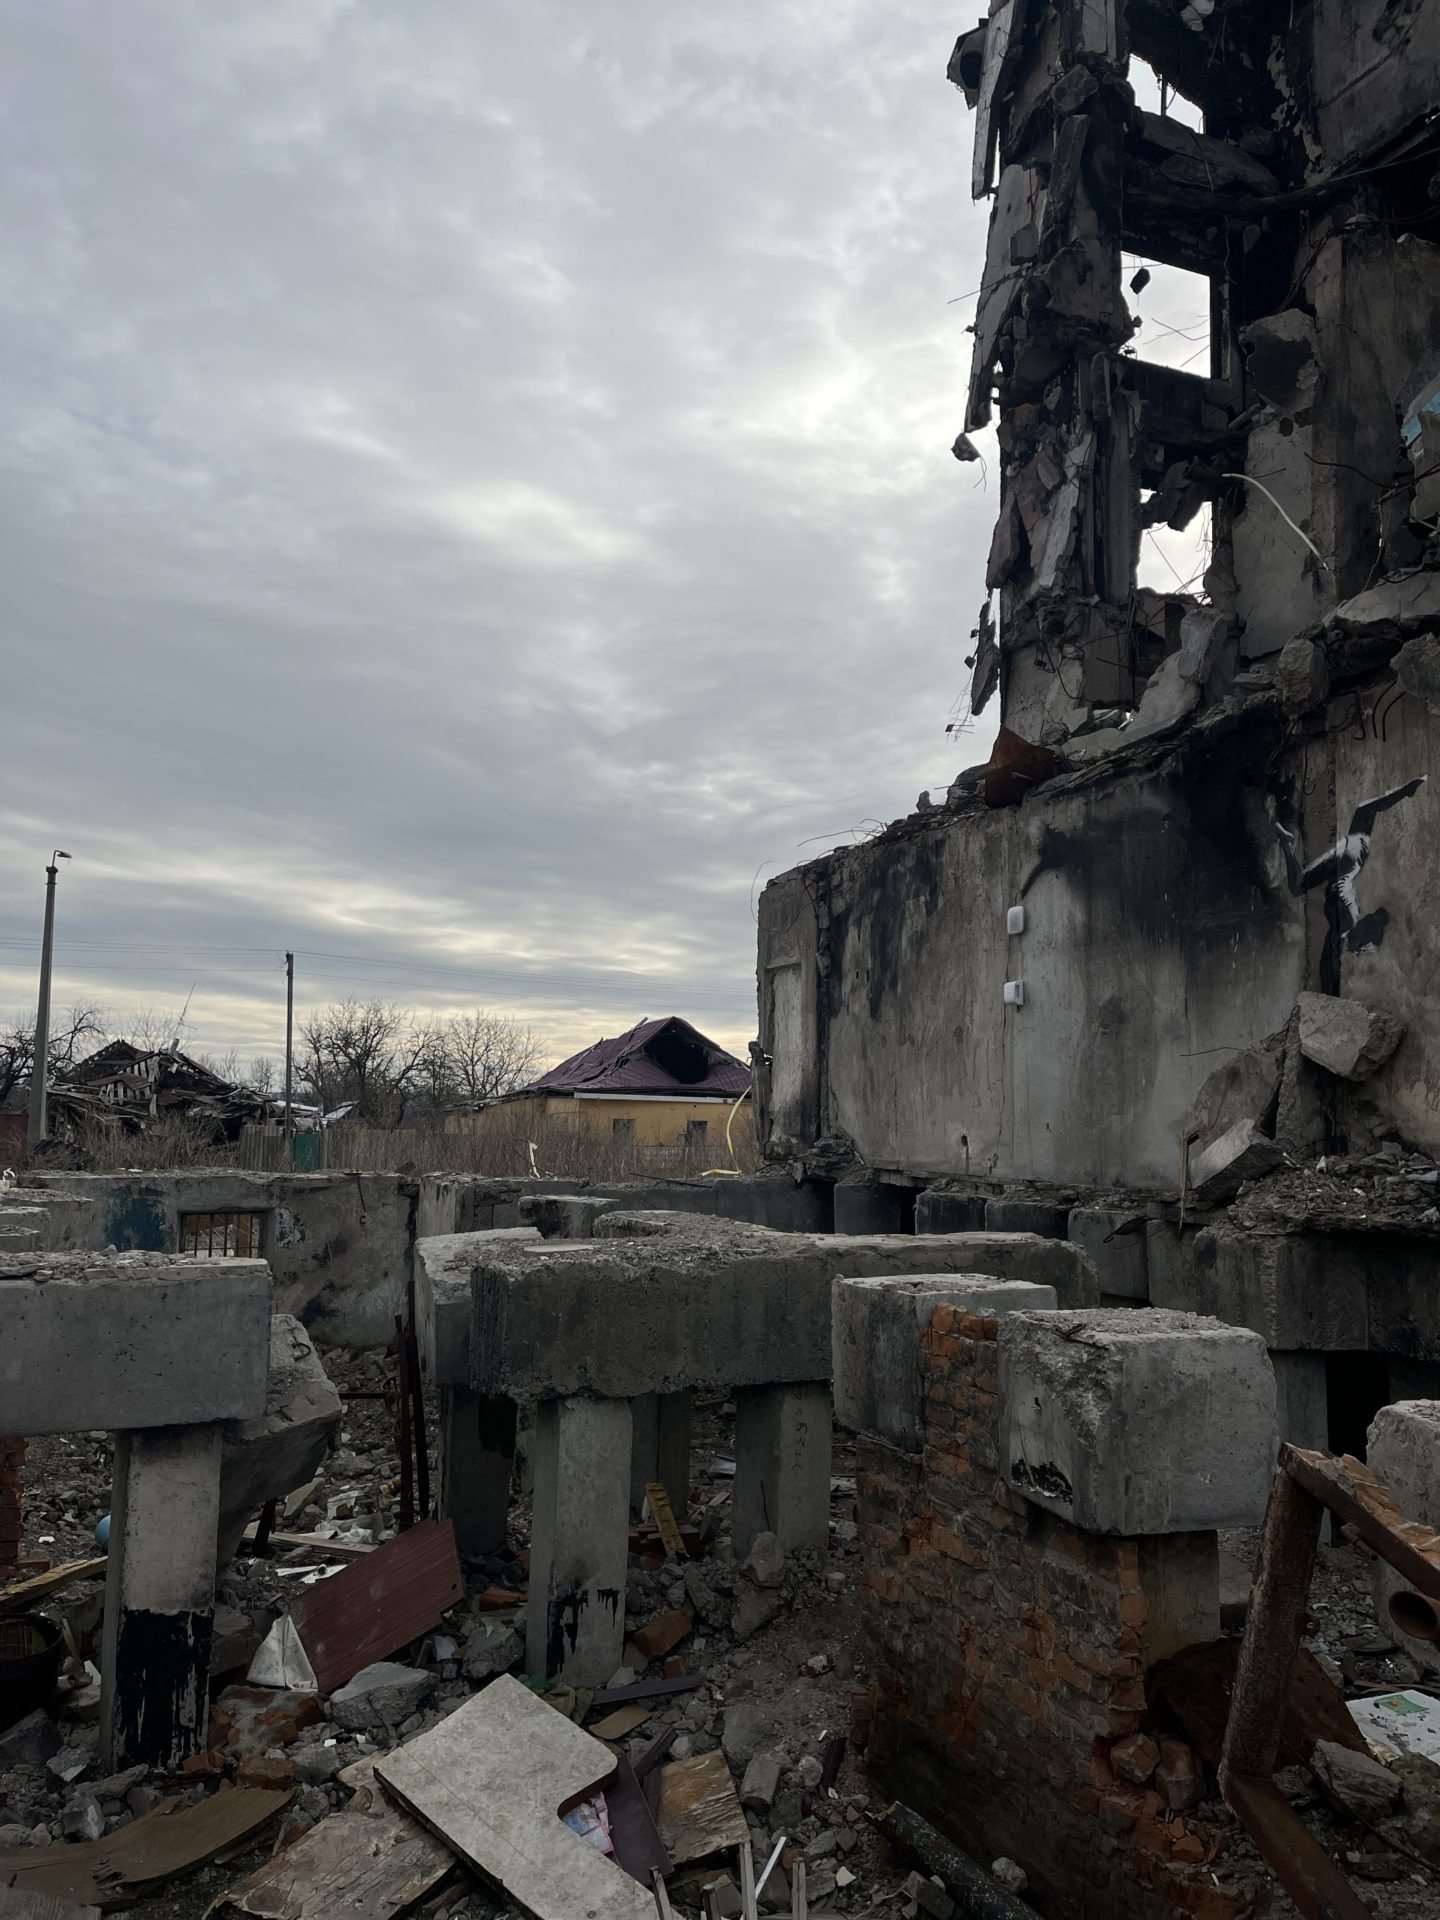 Some of the damaged buildings in Kyiv, Ukraine